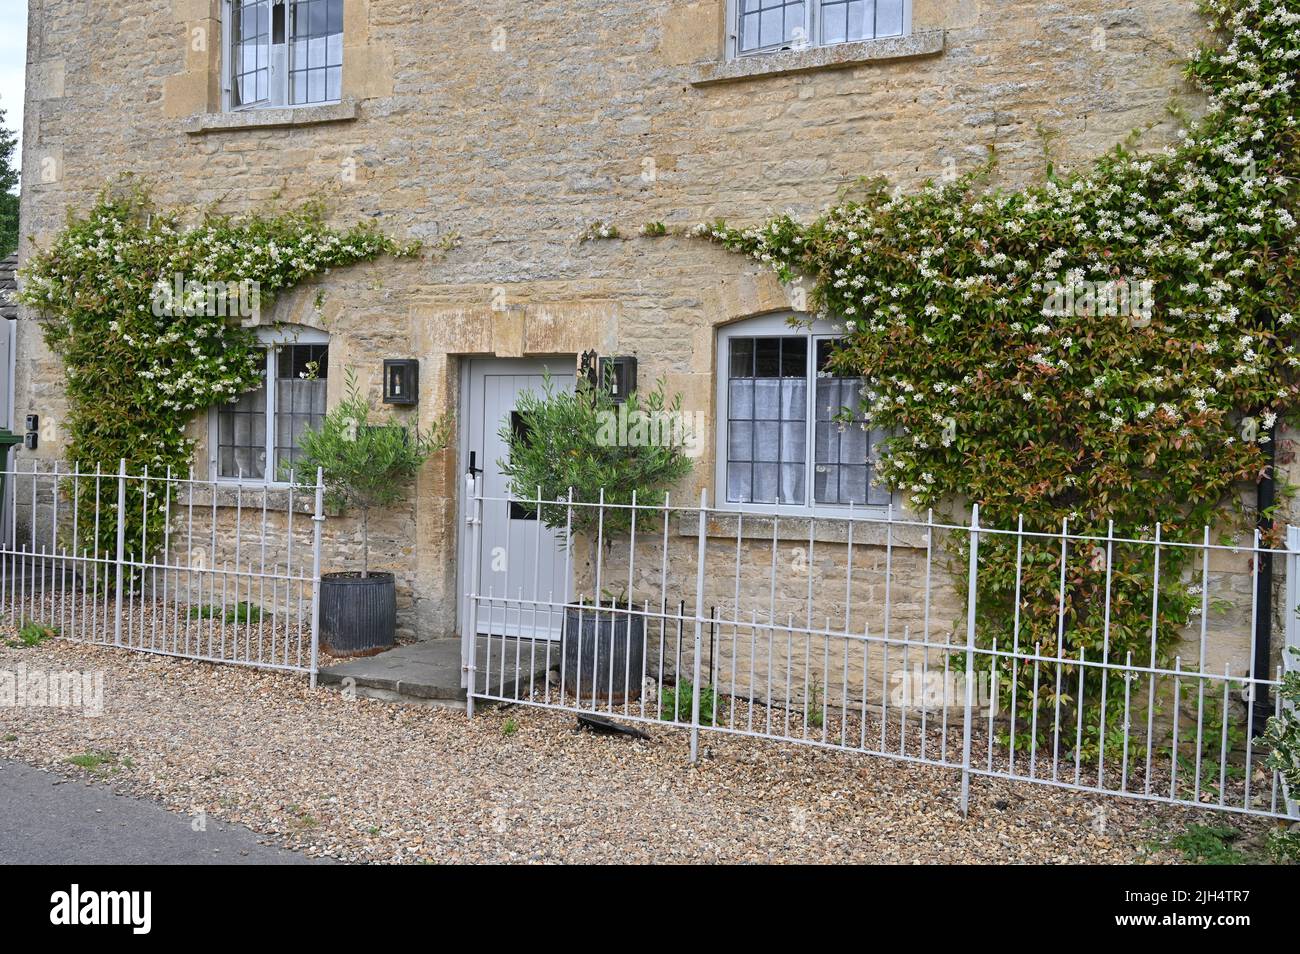 The front of a house in the Gloucestershire vilalge of Upper Slaughter with jasmine growing up the wall. The gaden is enclosed by railings. Stock Photo